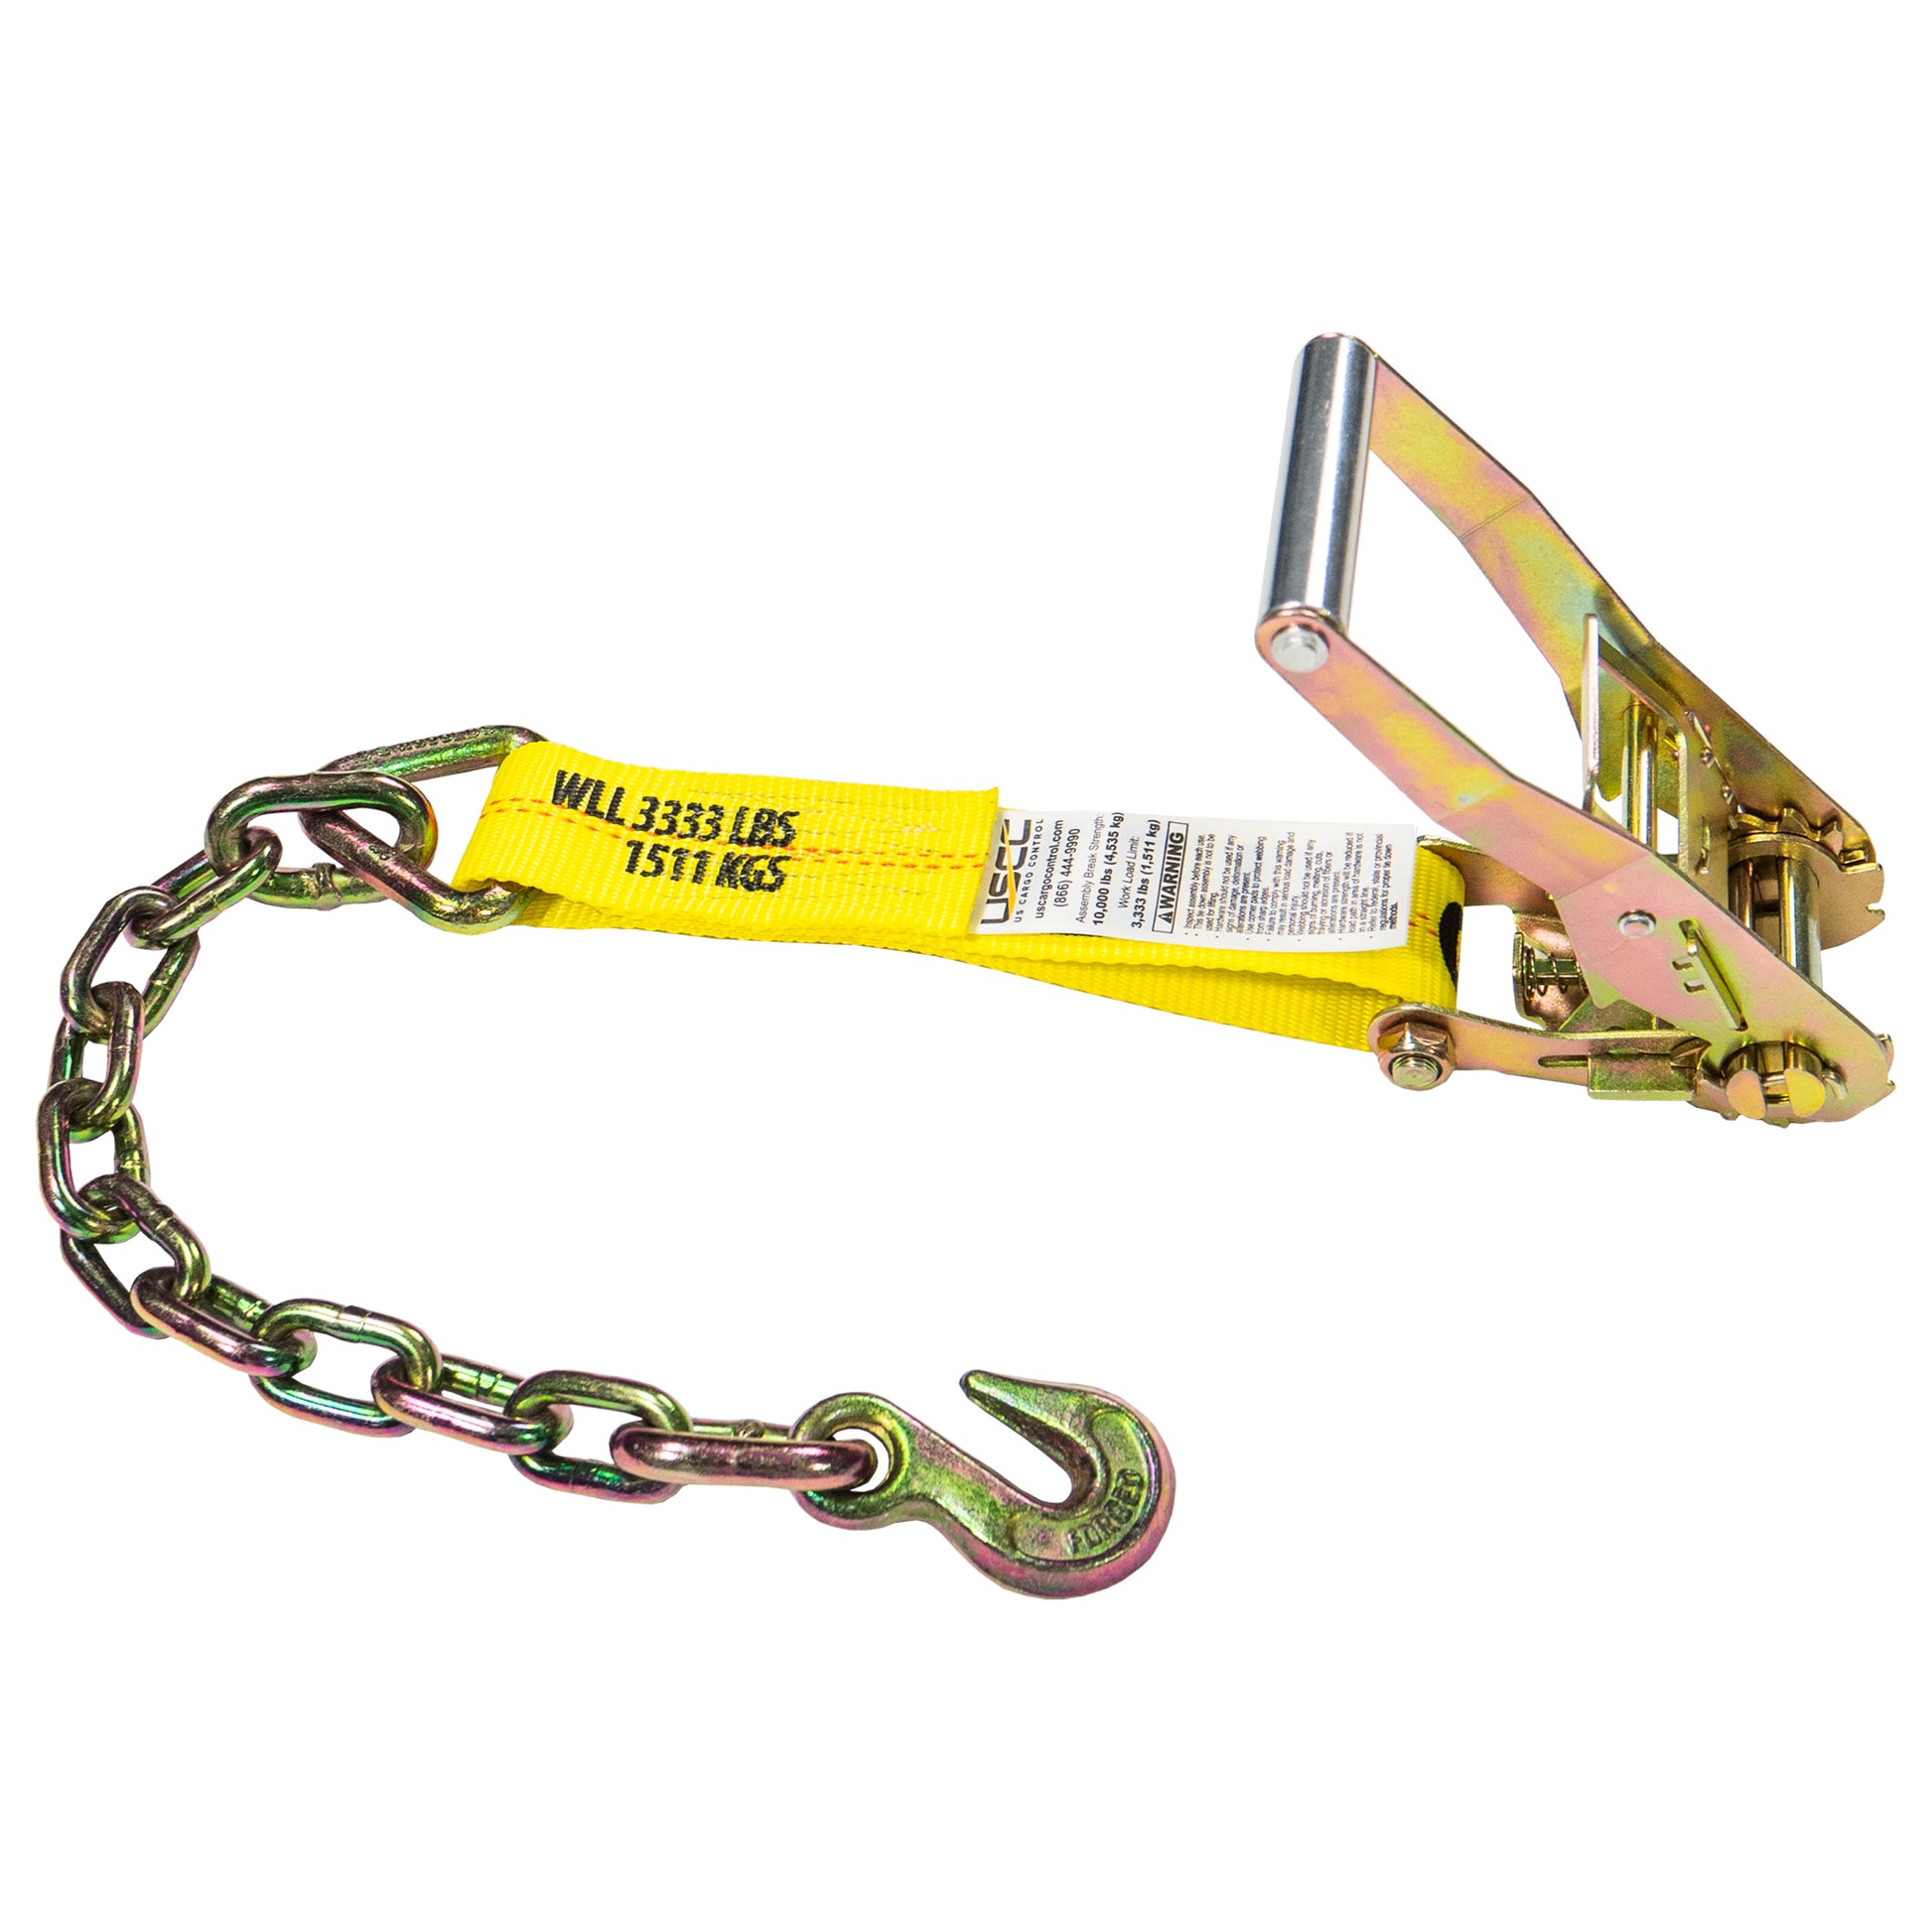 2" x 11" Fixed End w/ Ratchet and Chain Extension